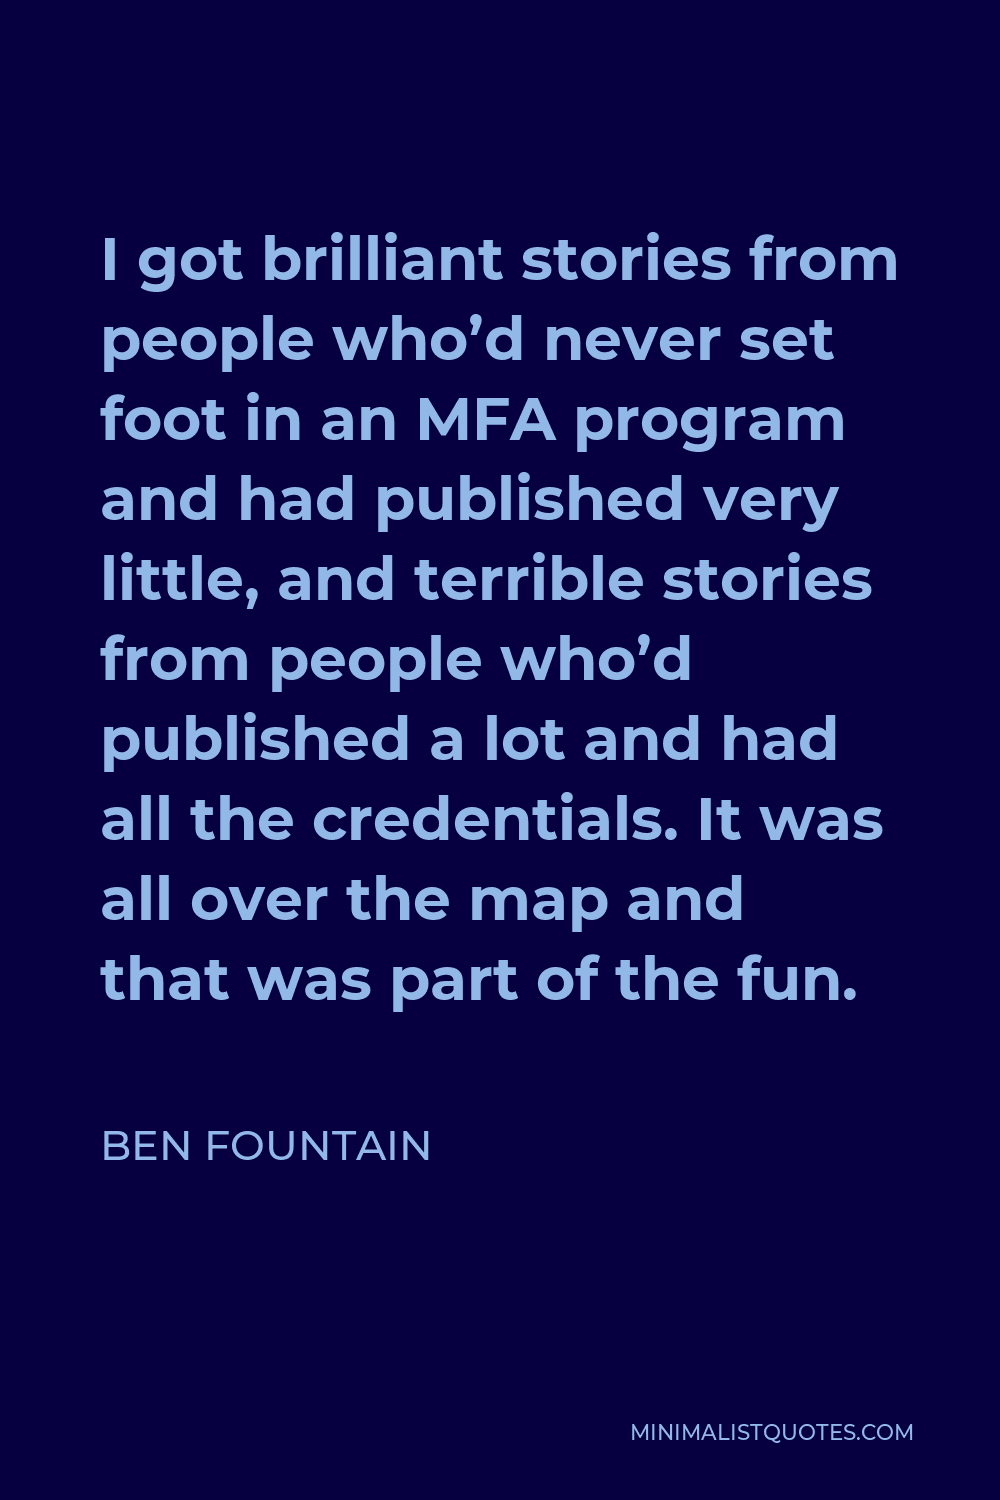 Ben Fountain Quote - I got brilliant stories from people who’d never set foot in an MFA program and had published very little, and terrible stories from people who’d published a lot and had all the credentials. It was all over the map and that was part of the fun.